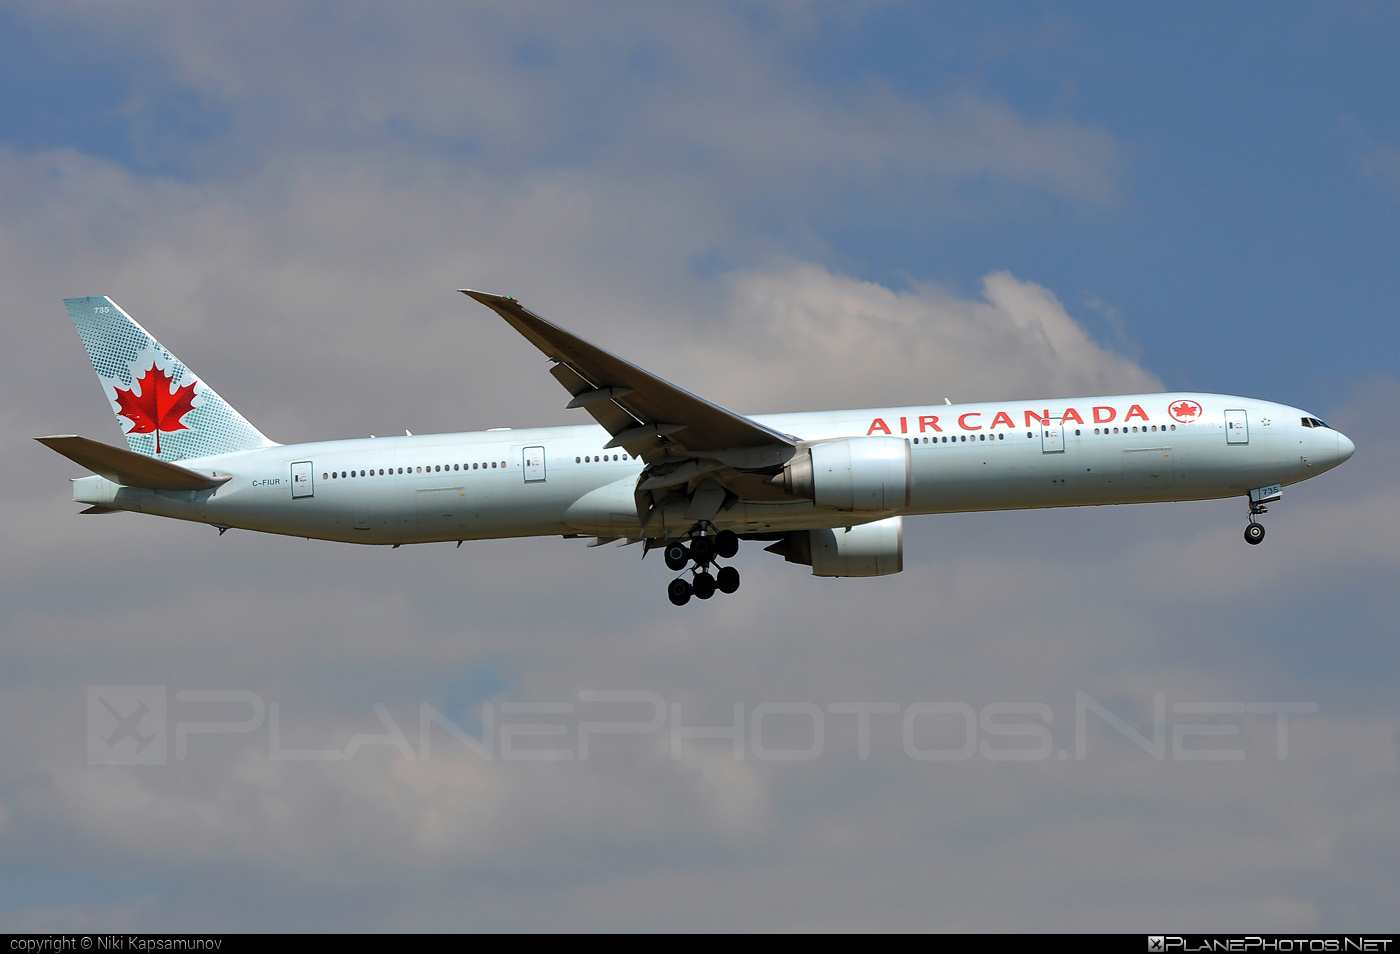 Boeing 777-300ER - C-FIUR operated by Air Canada #airCanada #b777 #b777er #boeing #boeing777 #tripleseven